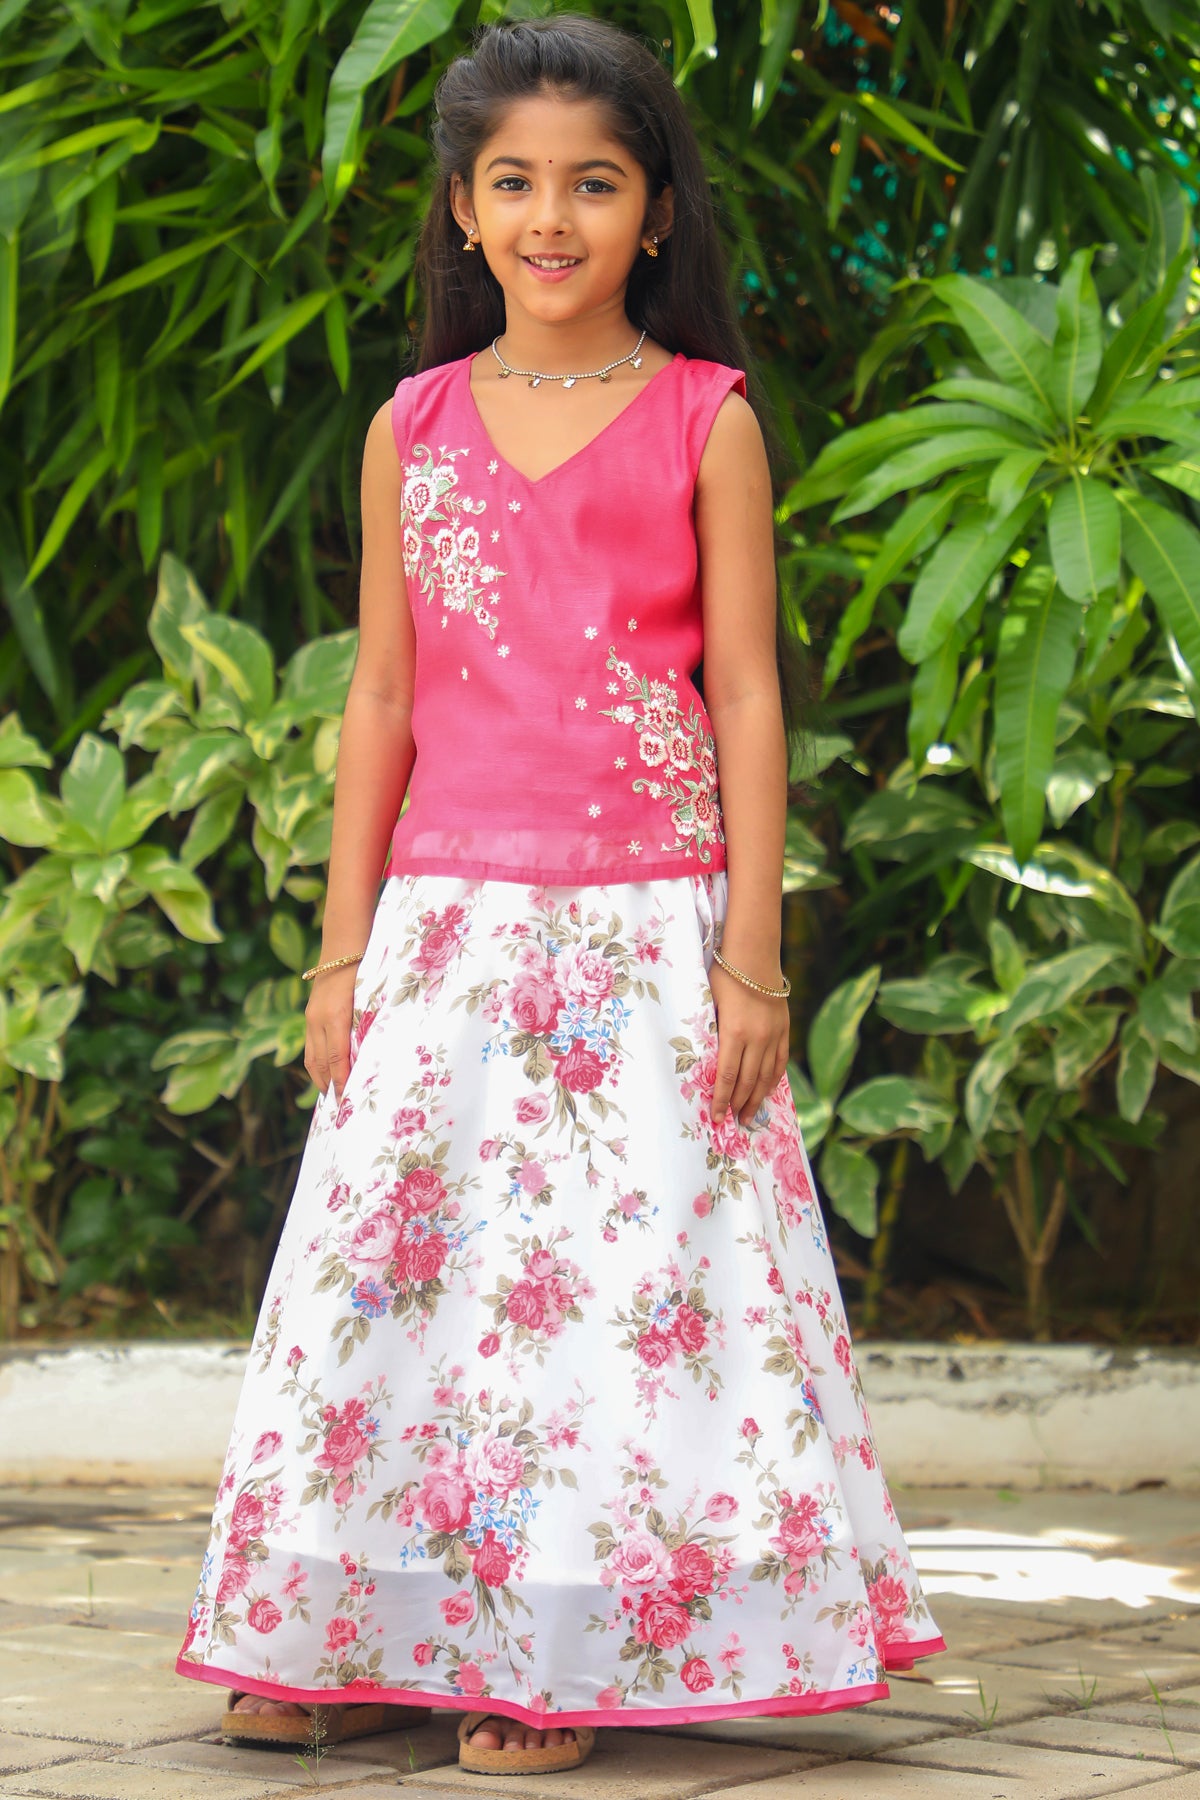 Floral Embroidered Sleeveless Top All Over Vintage Floral Printed Skirt Set Pink White